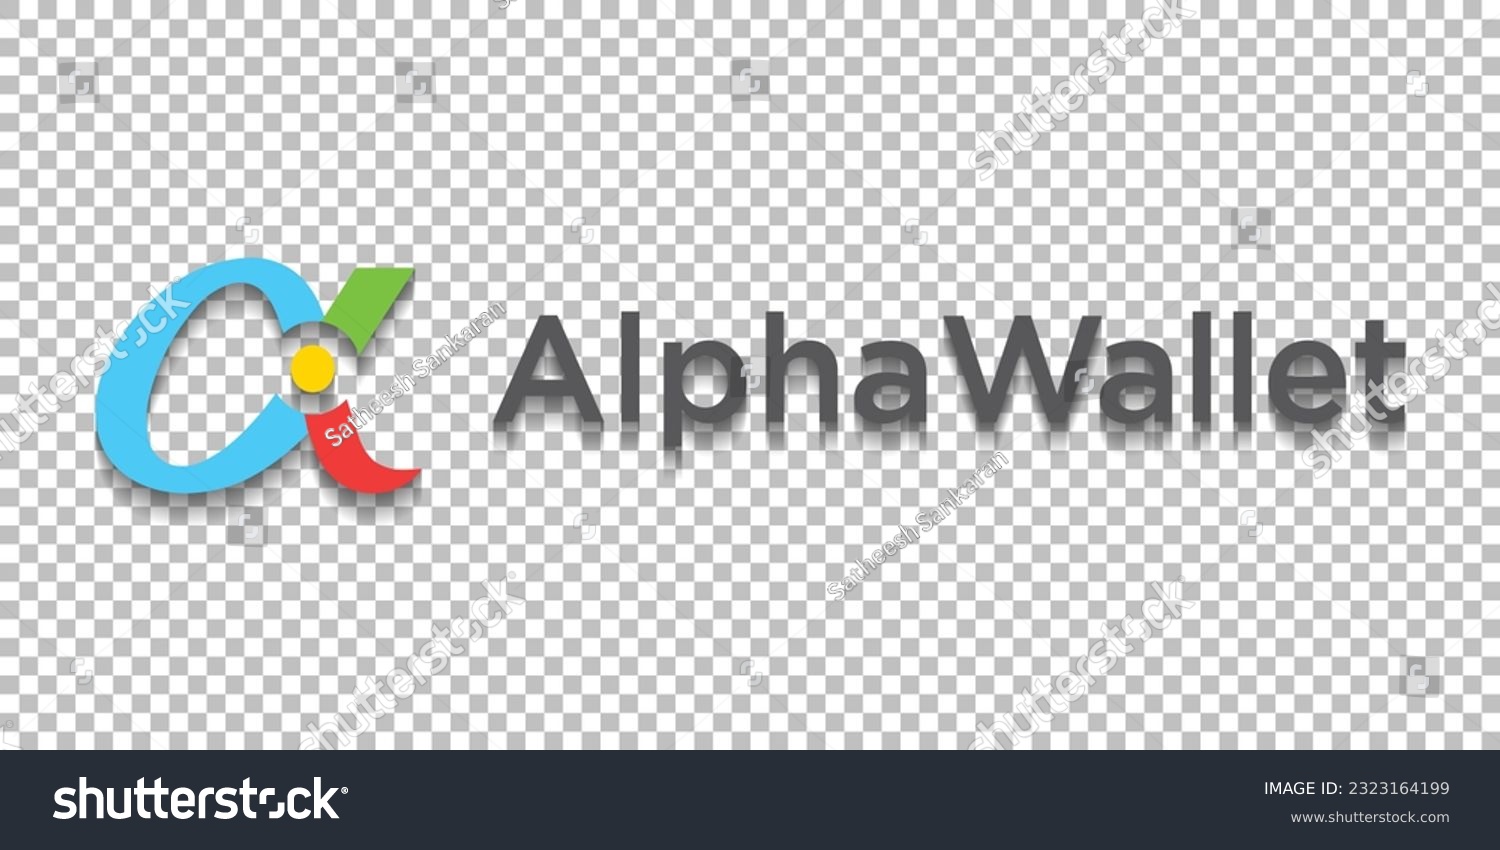 SVG of Alpha Wallet cryptocurrency logo worldmark isolated on transparent png background vector svg